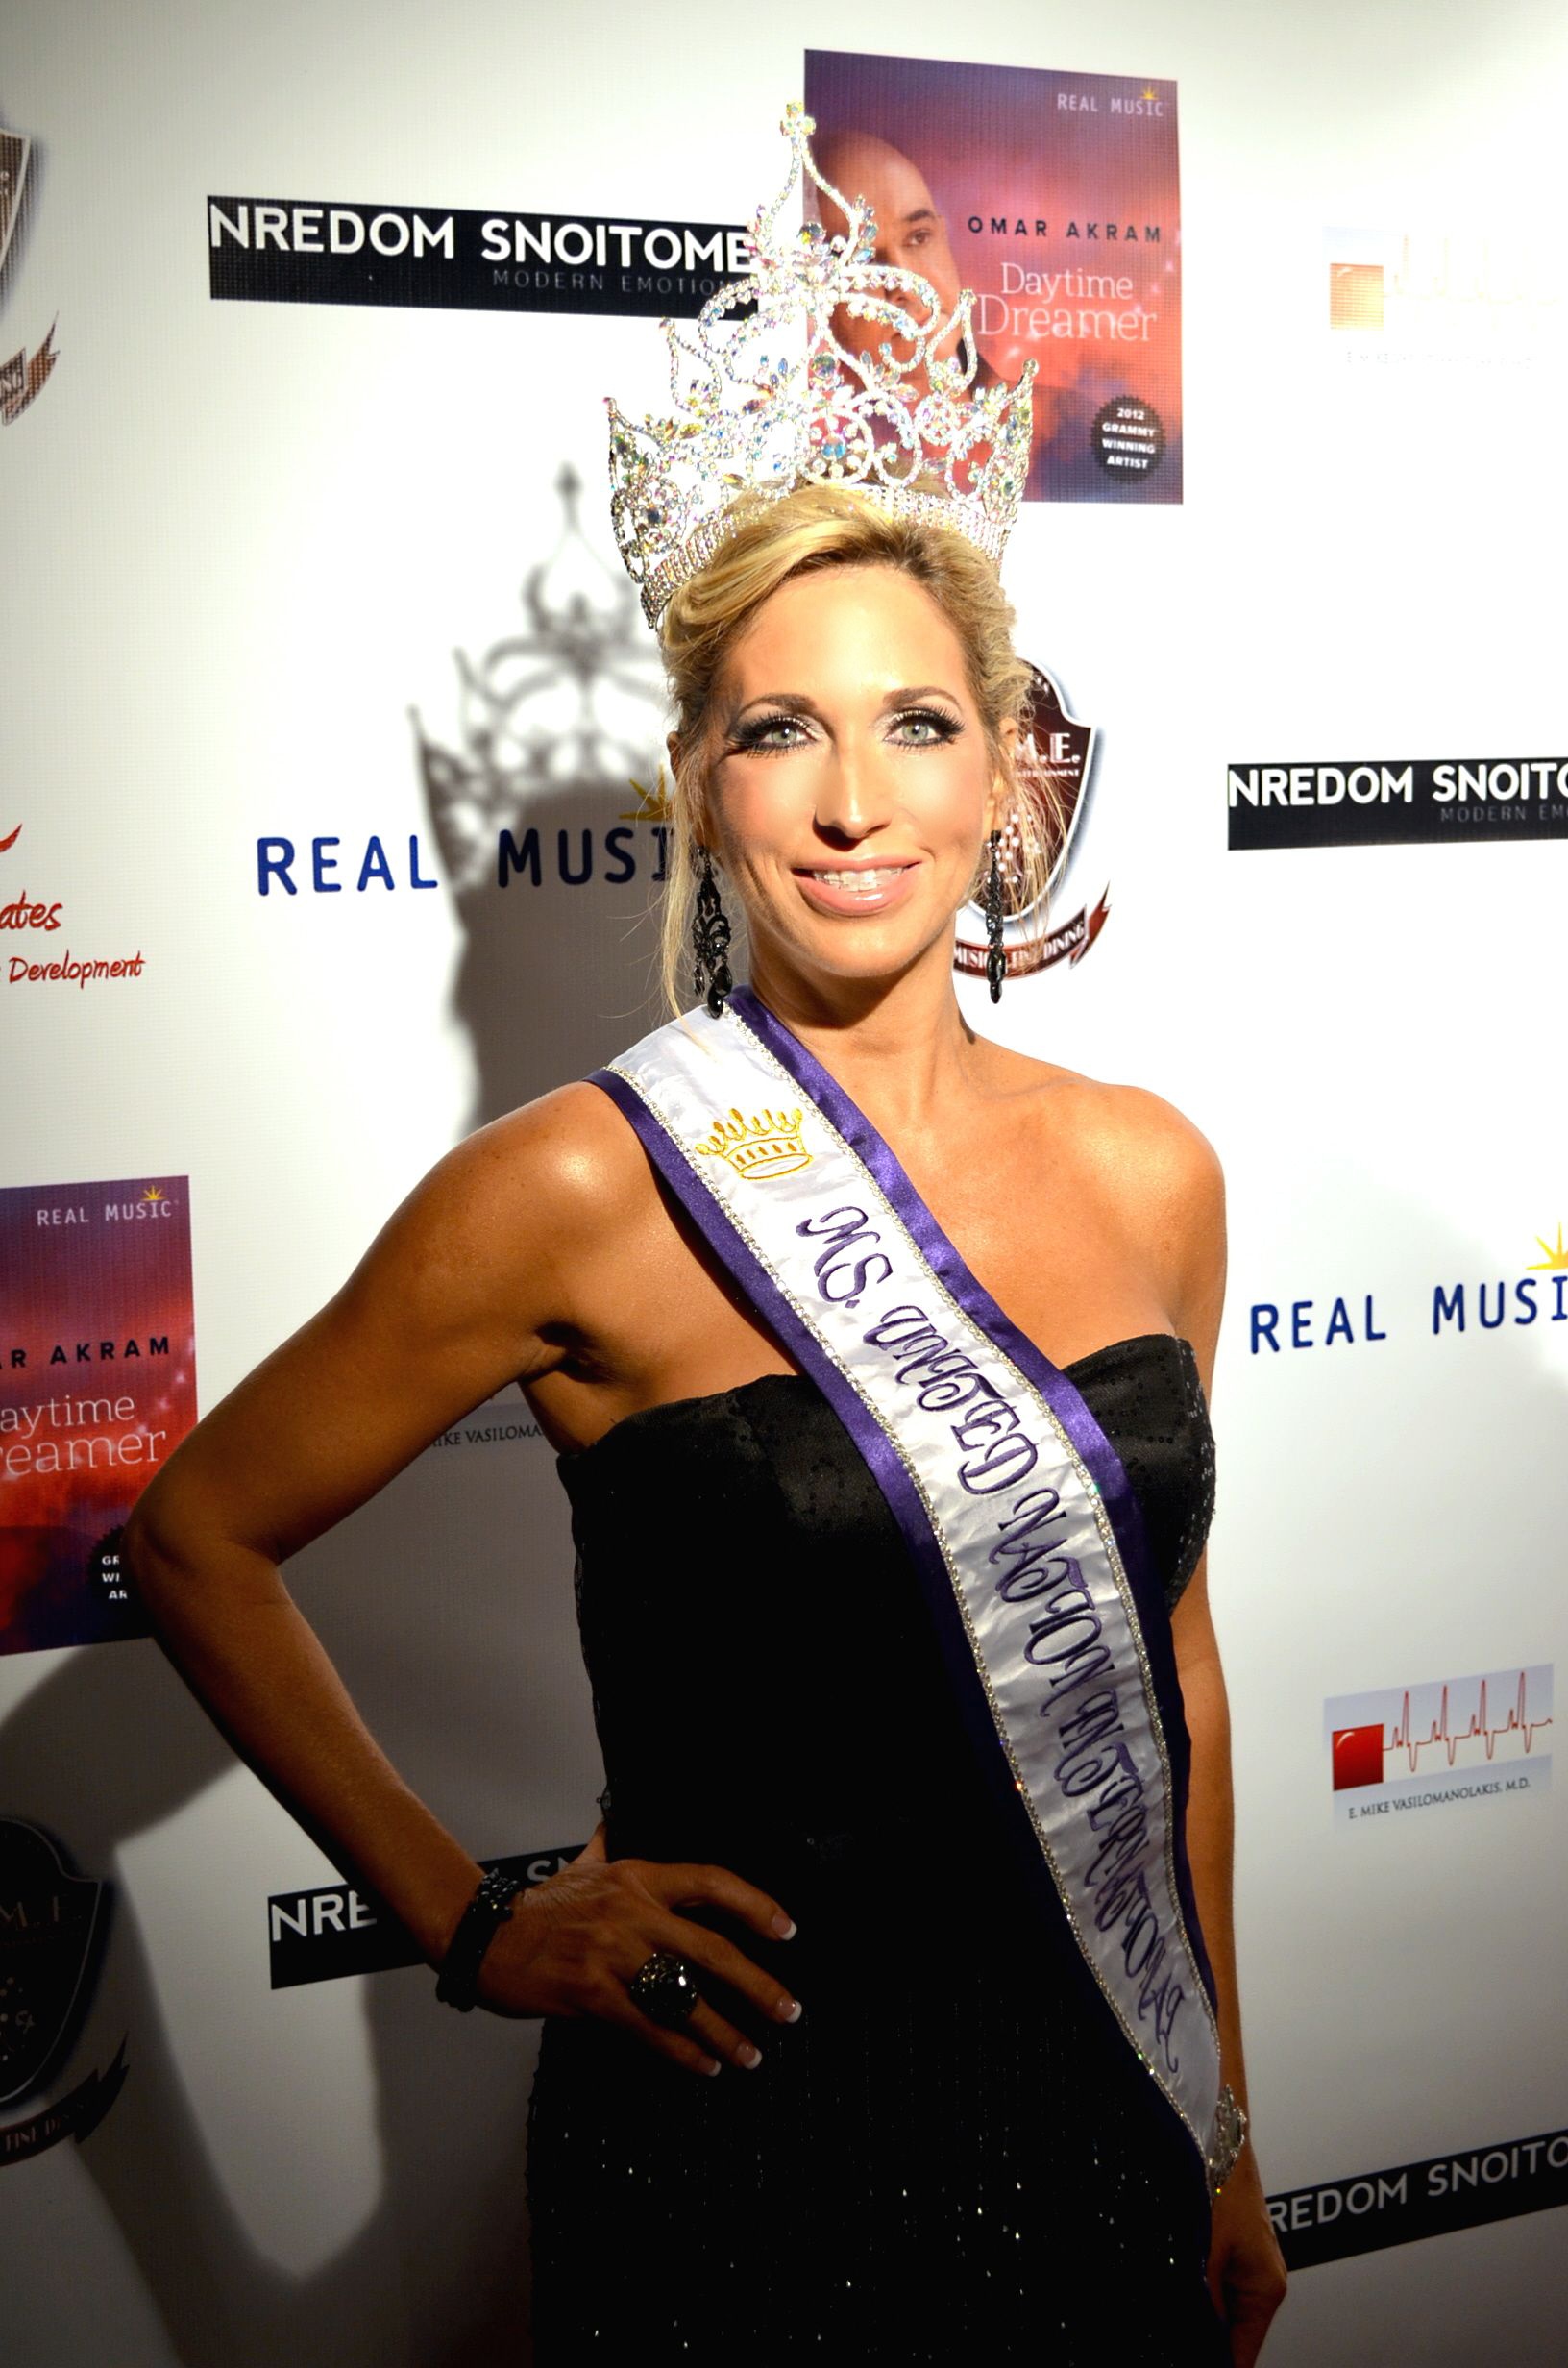 Carla Gonzalez, Ms. United Nation International 2013-14 attends and walks the Red Carpet at Grammy Award Winner Omar Akram's Album Release Party in Beverly Hills.